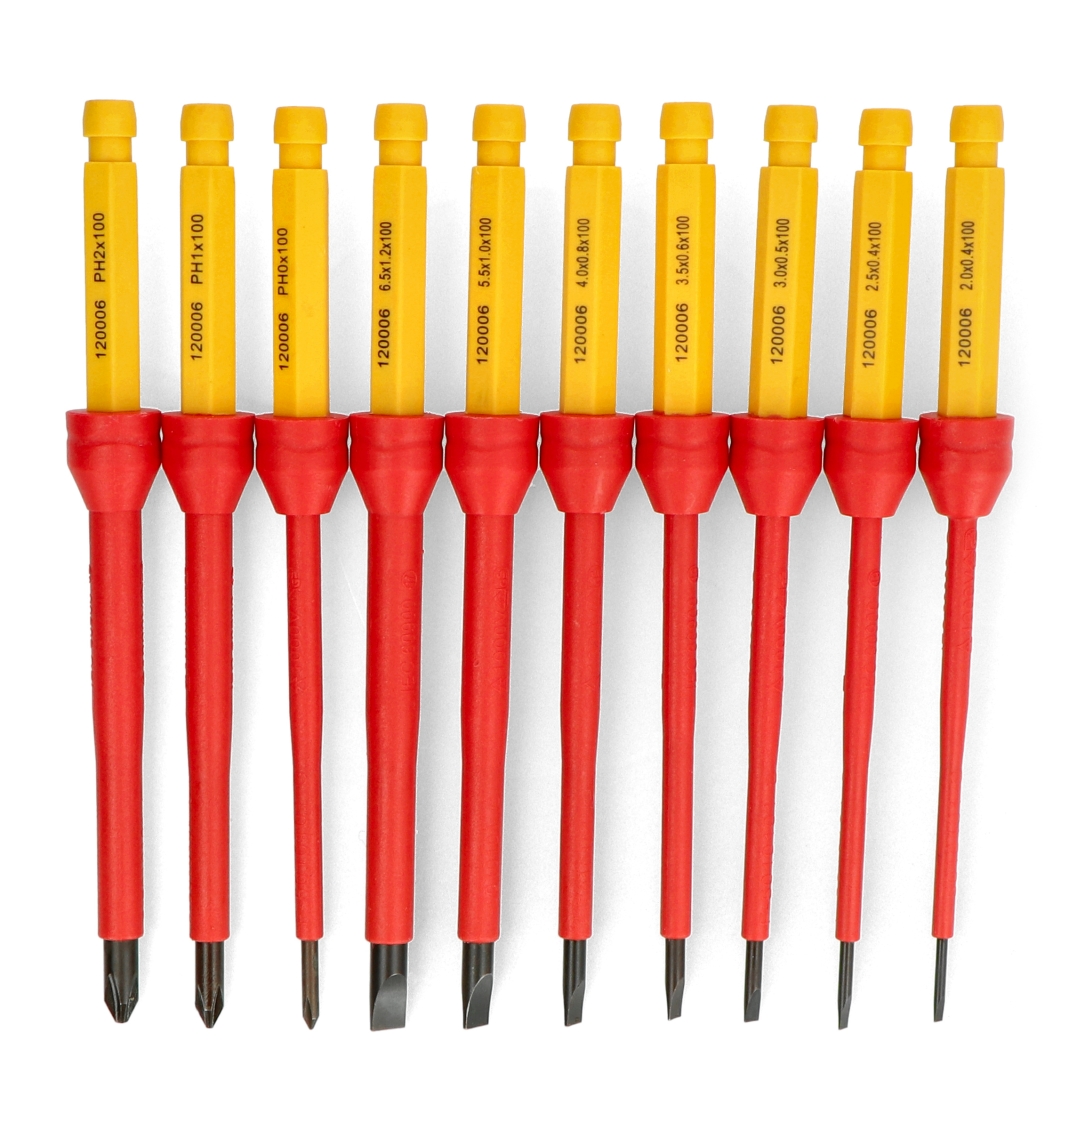 VDE insulated screwdriver with set 10 bits Yato Botland - Robotic Shop